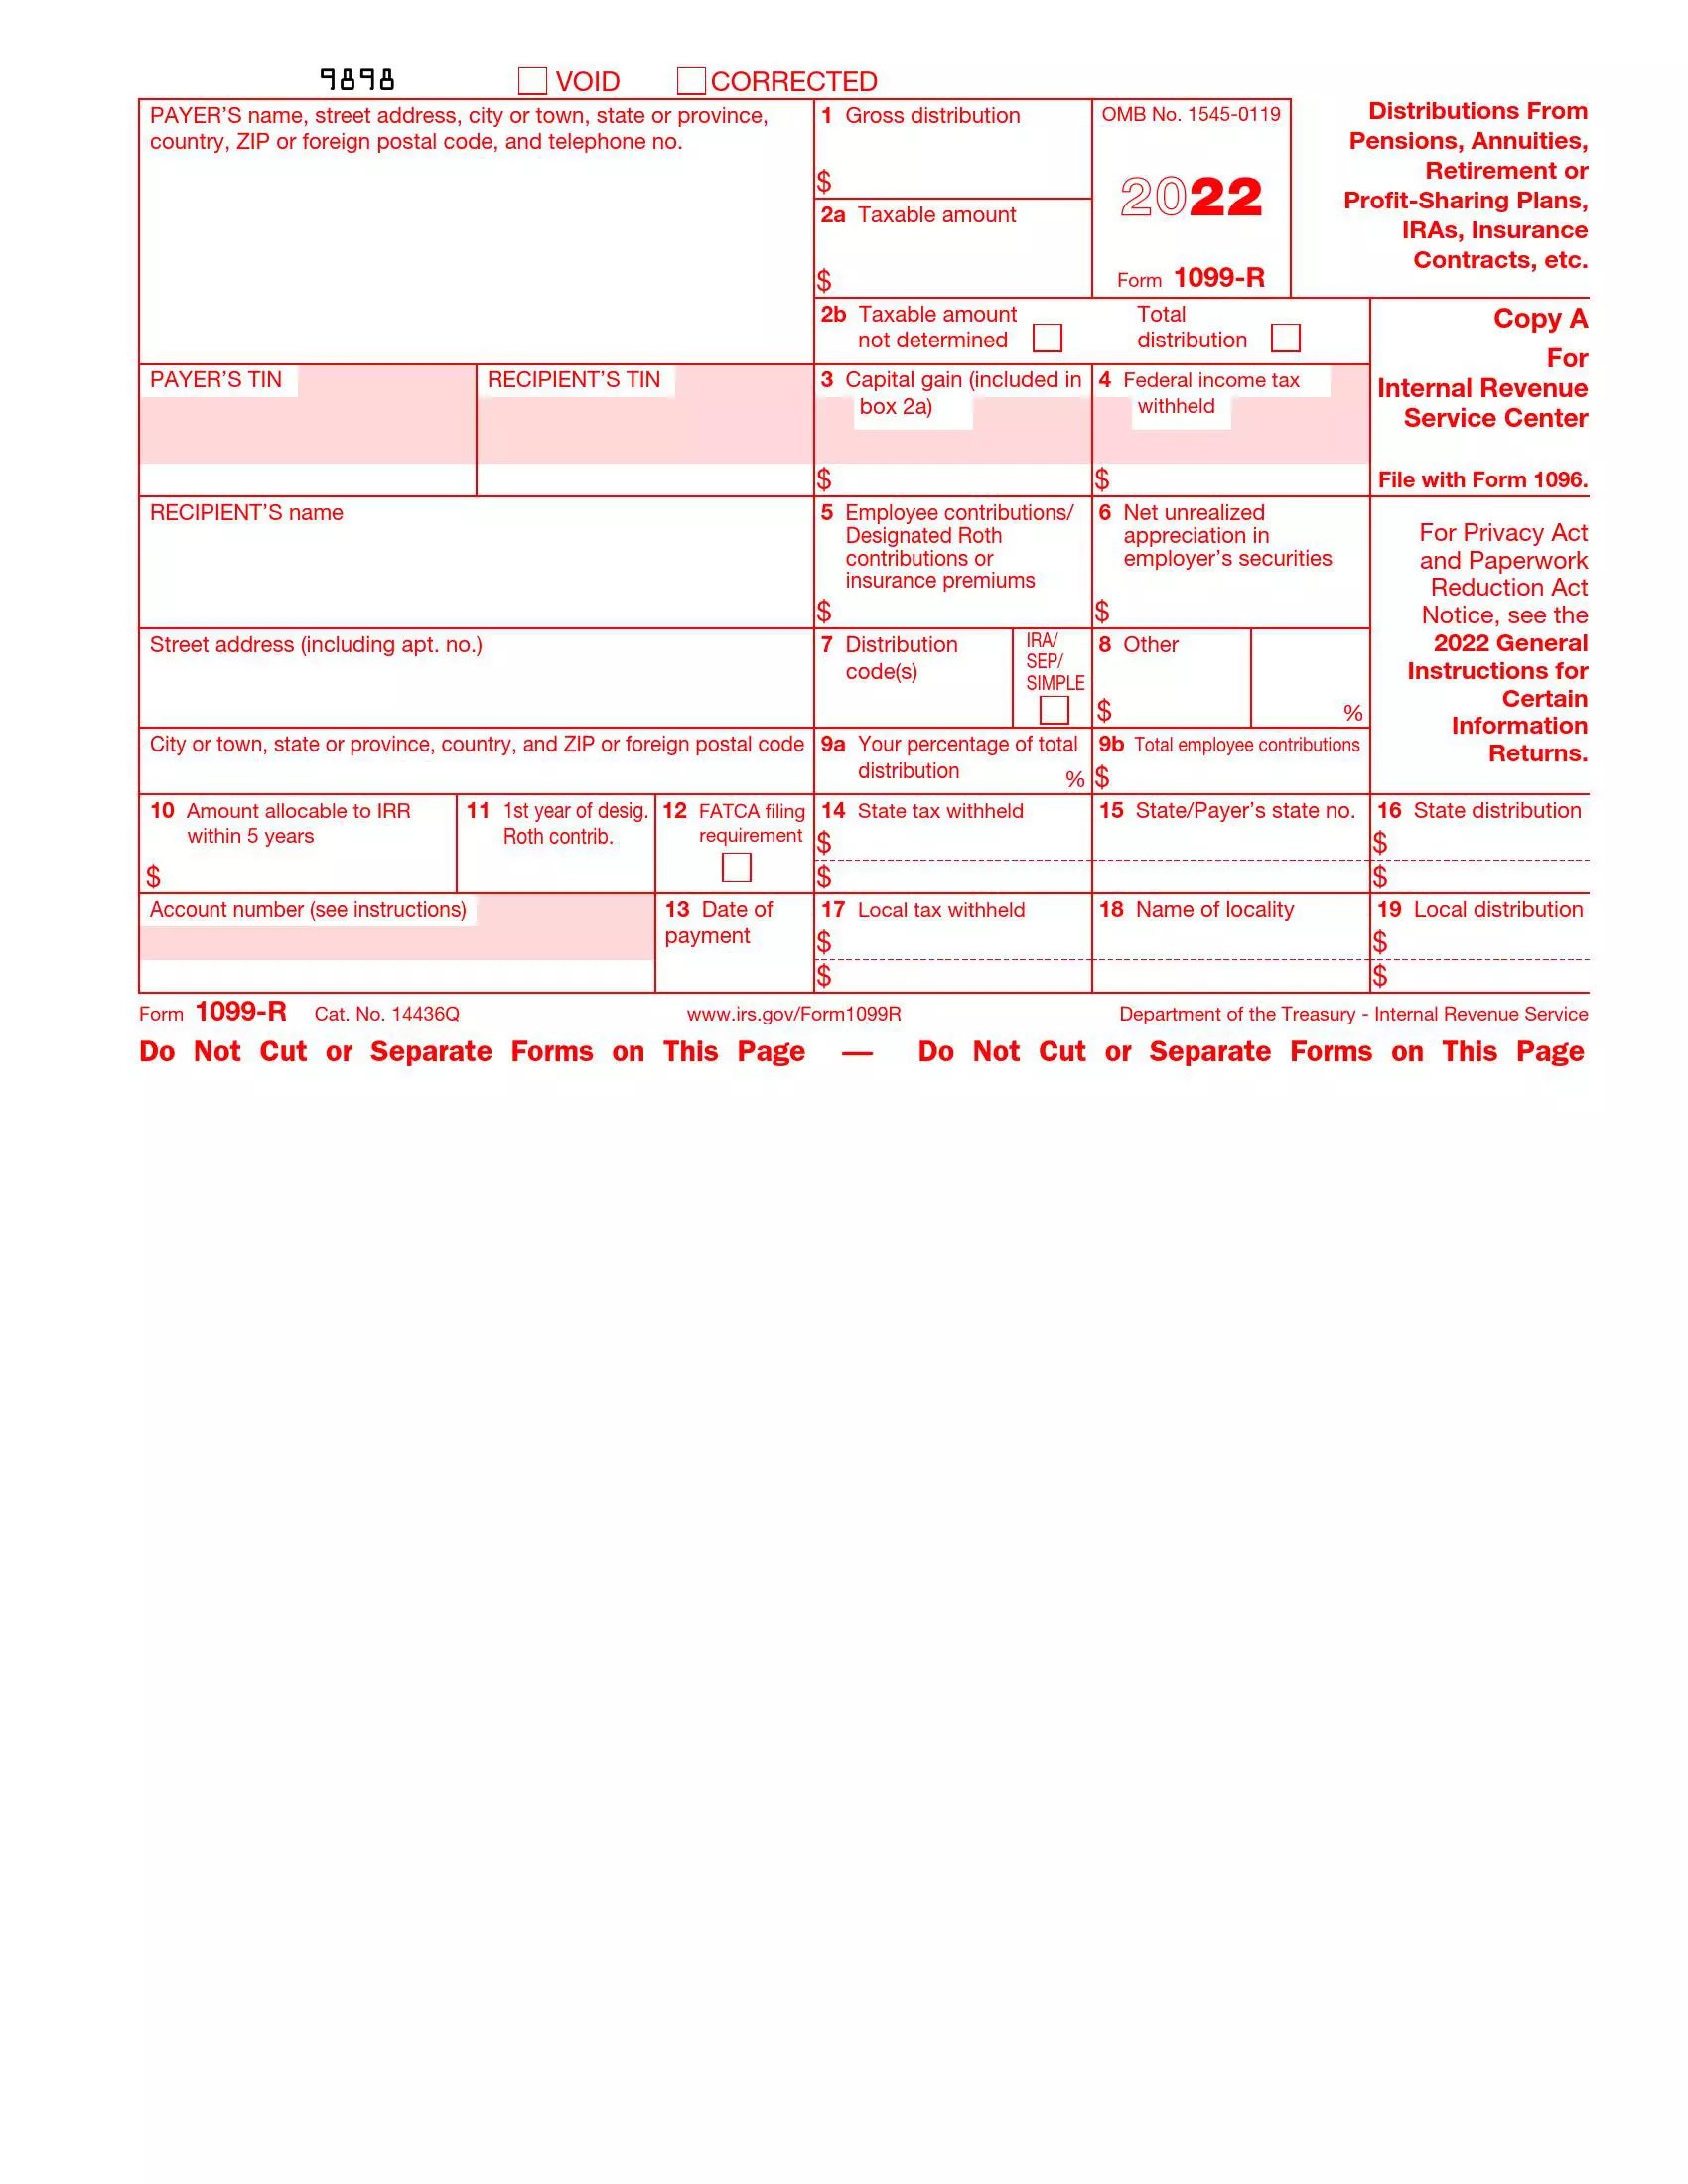 irs form 1099 r 2022 preview